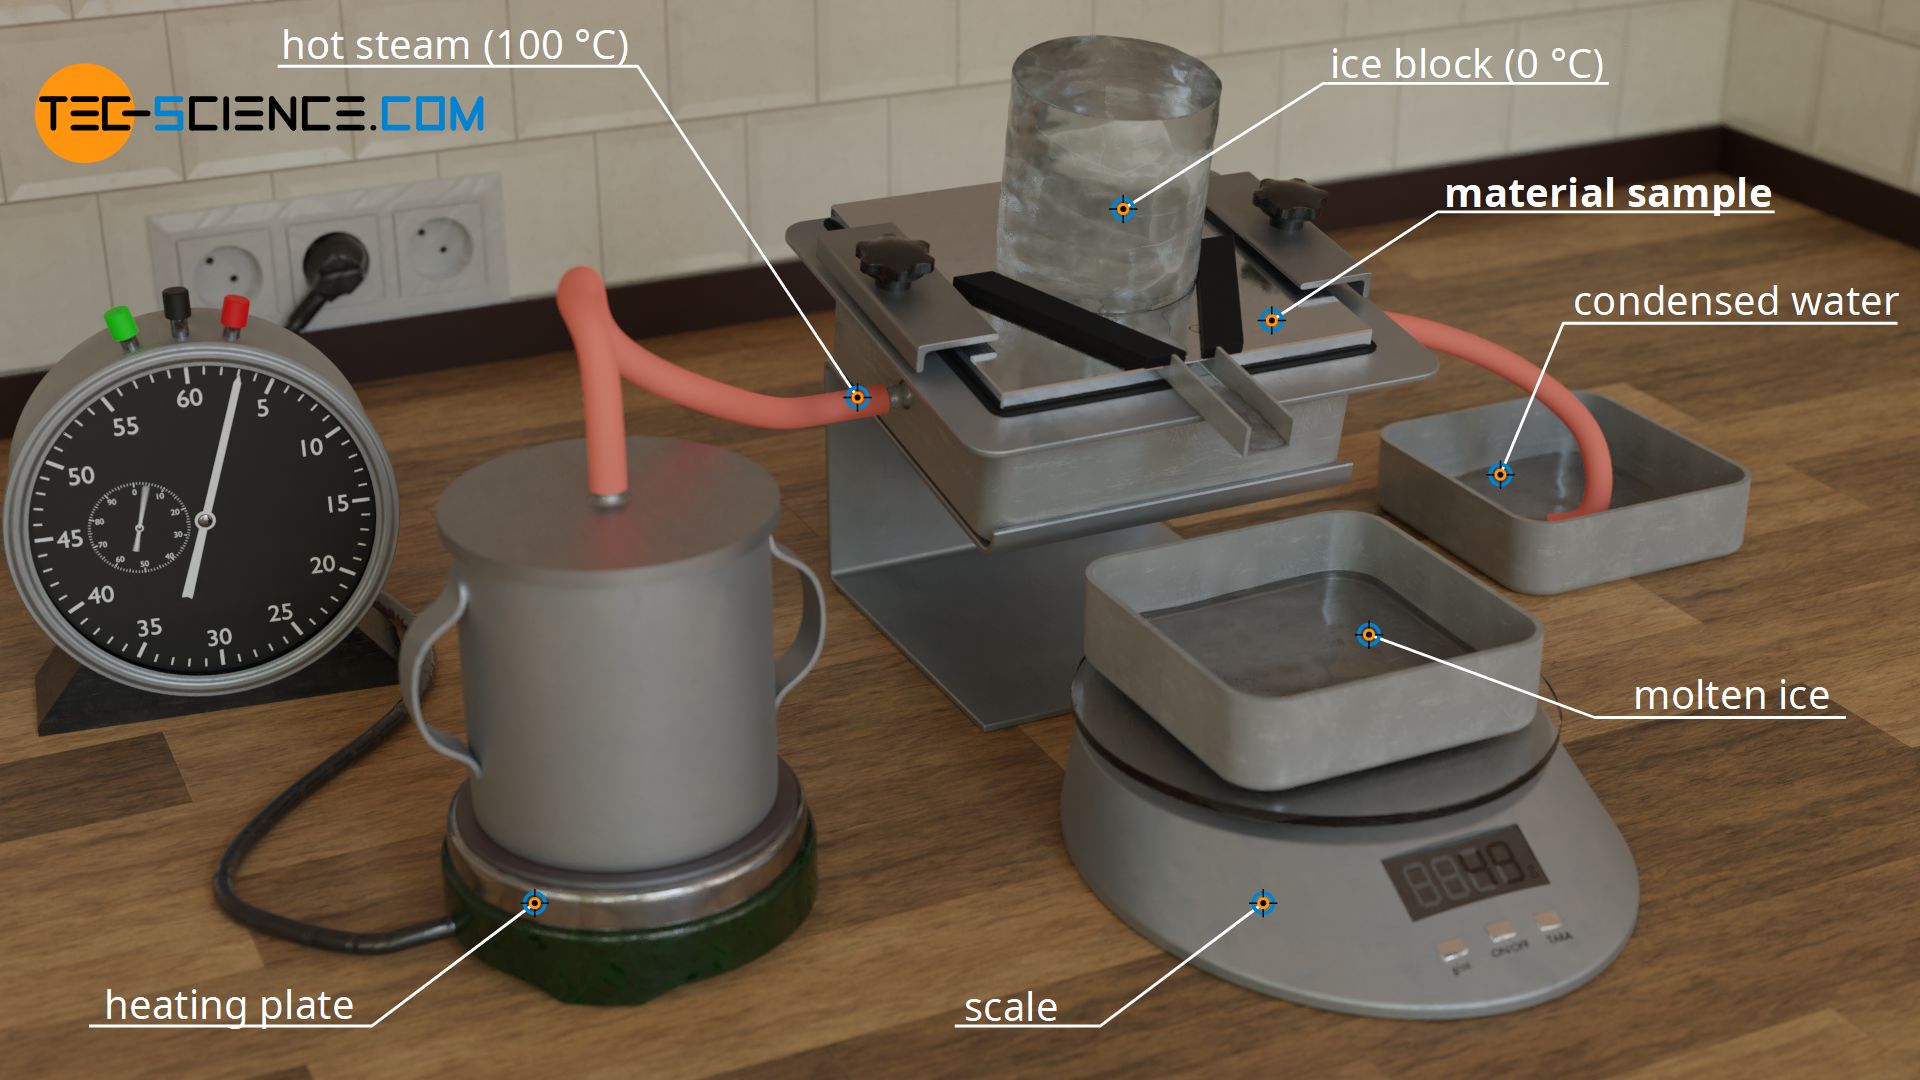 Experimental setup for the measurement of thermal conductivity